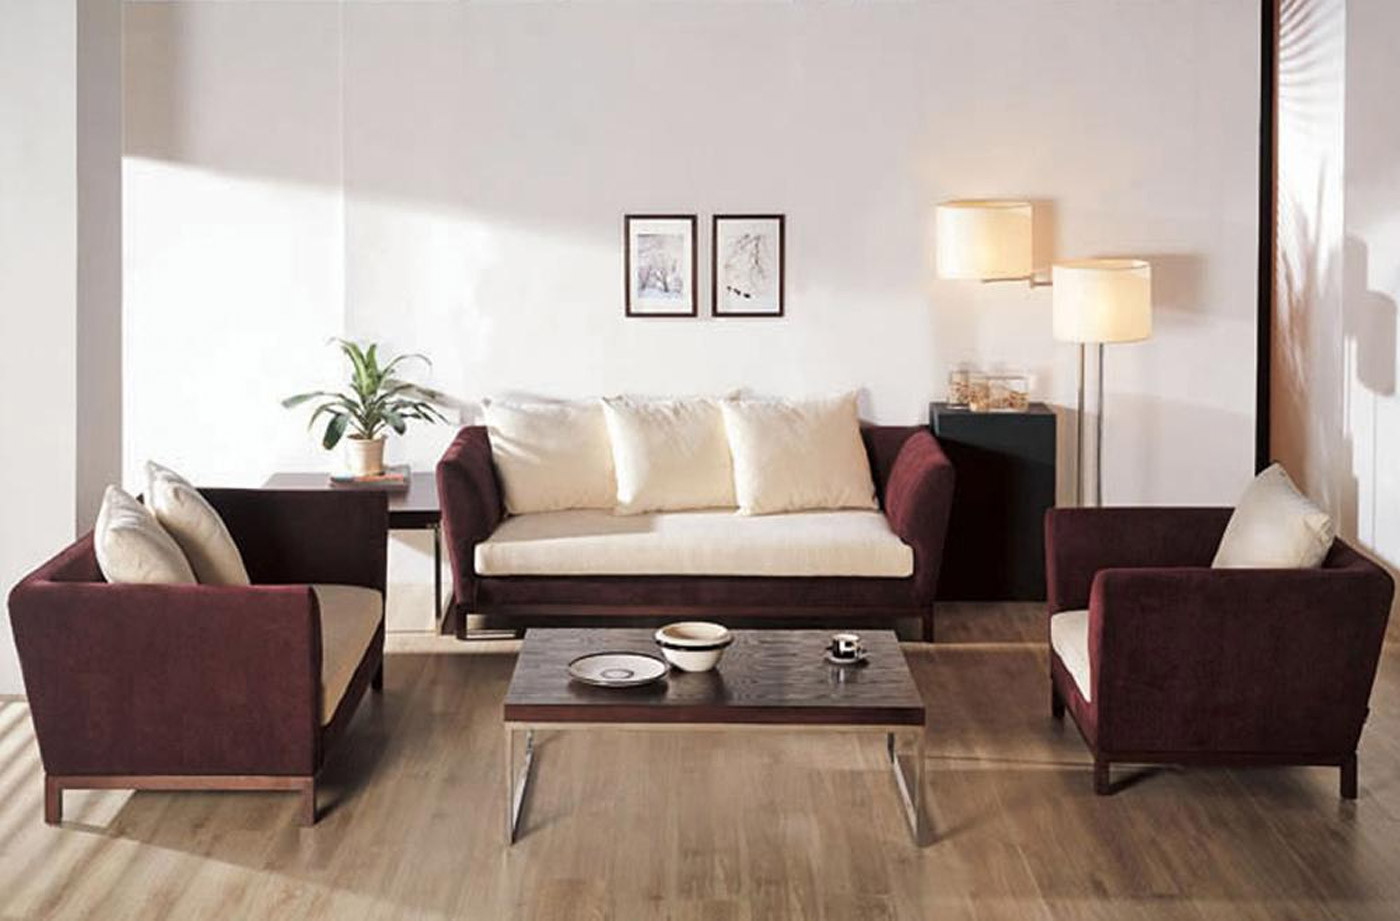 Small Living Room Tables
 Find Suitable Living Room Furniture With Your Style